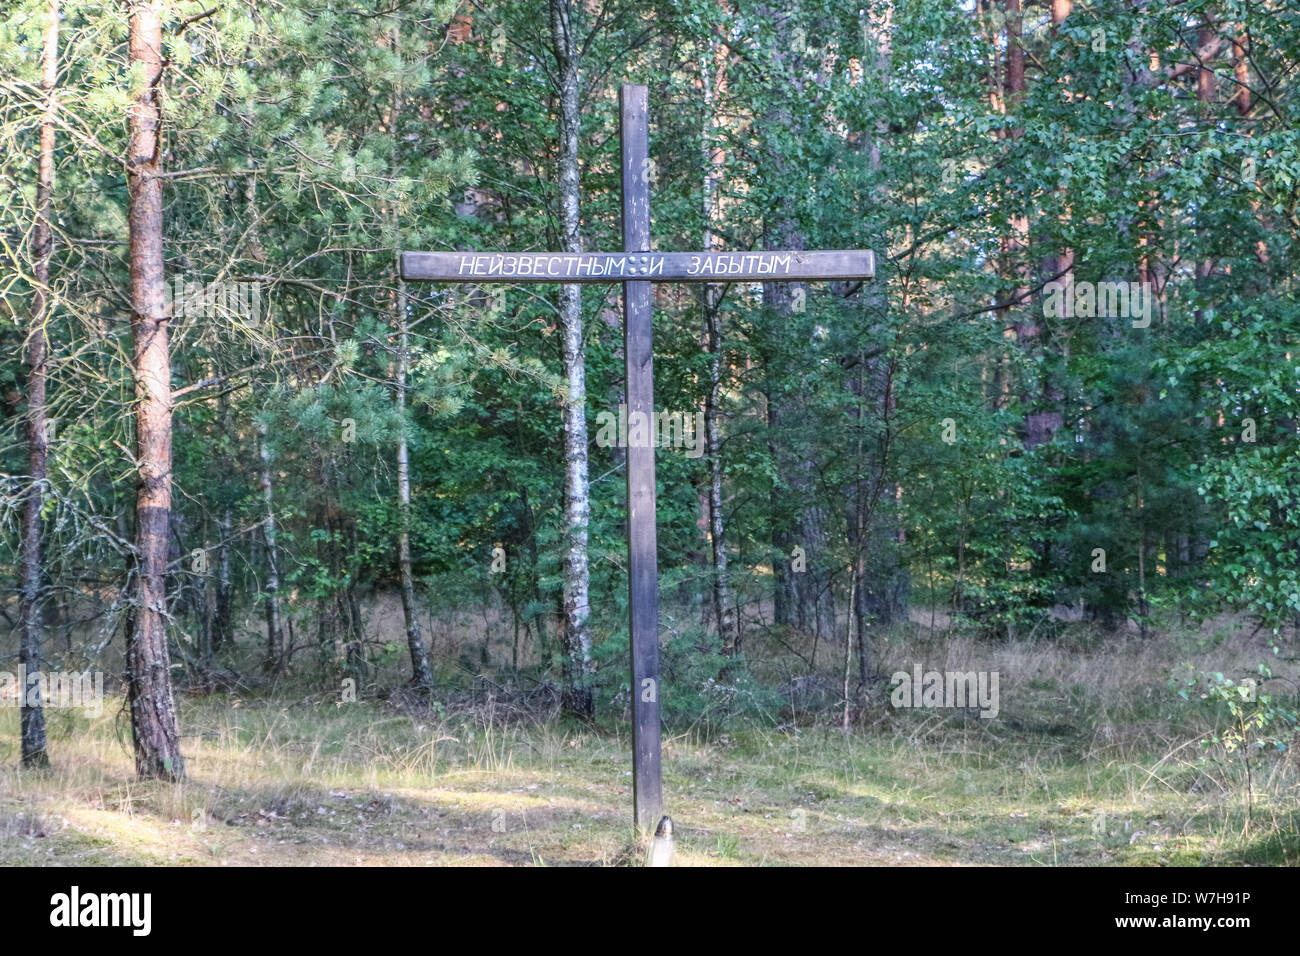 Borne Sulinowo, Poland. 3rd, August  2019 Cross with inscription that says - For unknown and forgotten  - is seen in Borne Sulinowo, Poland on 3 August 2019 Oflag II-D was a WWII German prisoner-of-war camp located at Gross Born was established to house French officers from the Battle of France, later Polish and Soviet soldiers. In Ja. 1945 there were 5,014 officers and 377 orderlies in the camp. © Vadim Pacajev / Alamy Live News Stock Photo